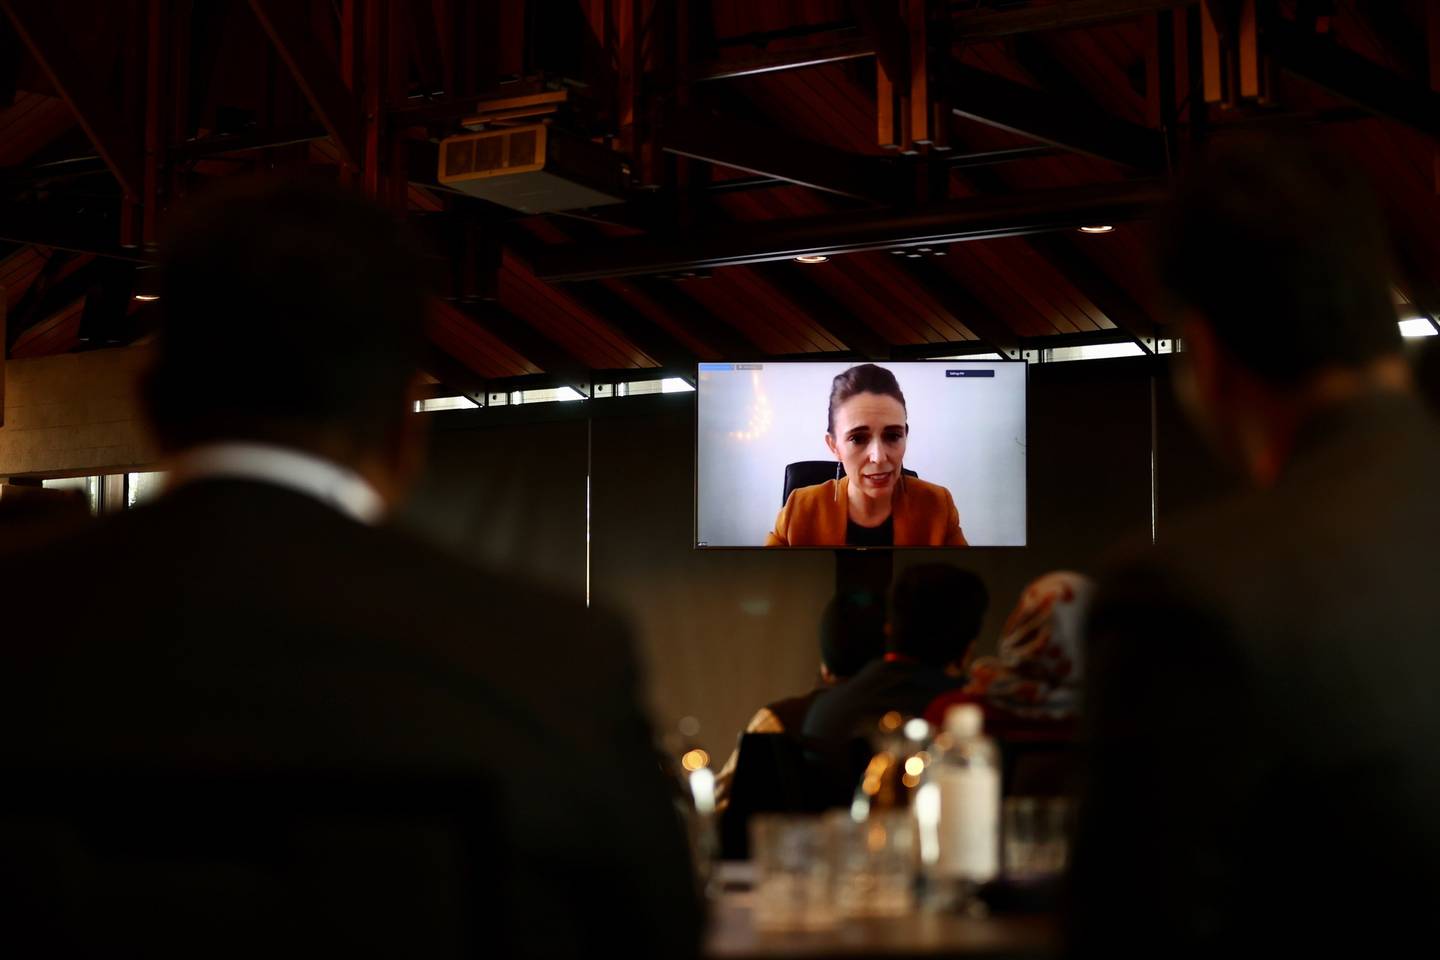 Prime Minister Jacinda Ardern spoke via Zoom after her flight into Christchurch was cancelled due to fog. Photo / George Heard